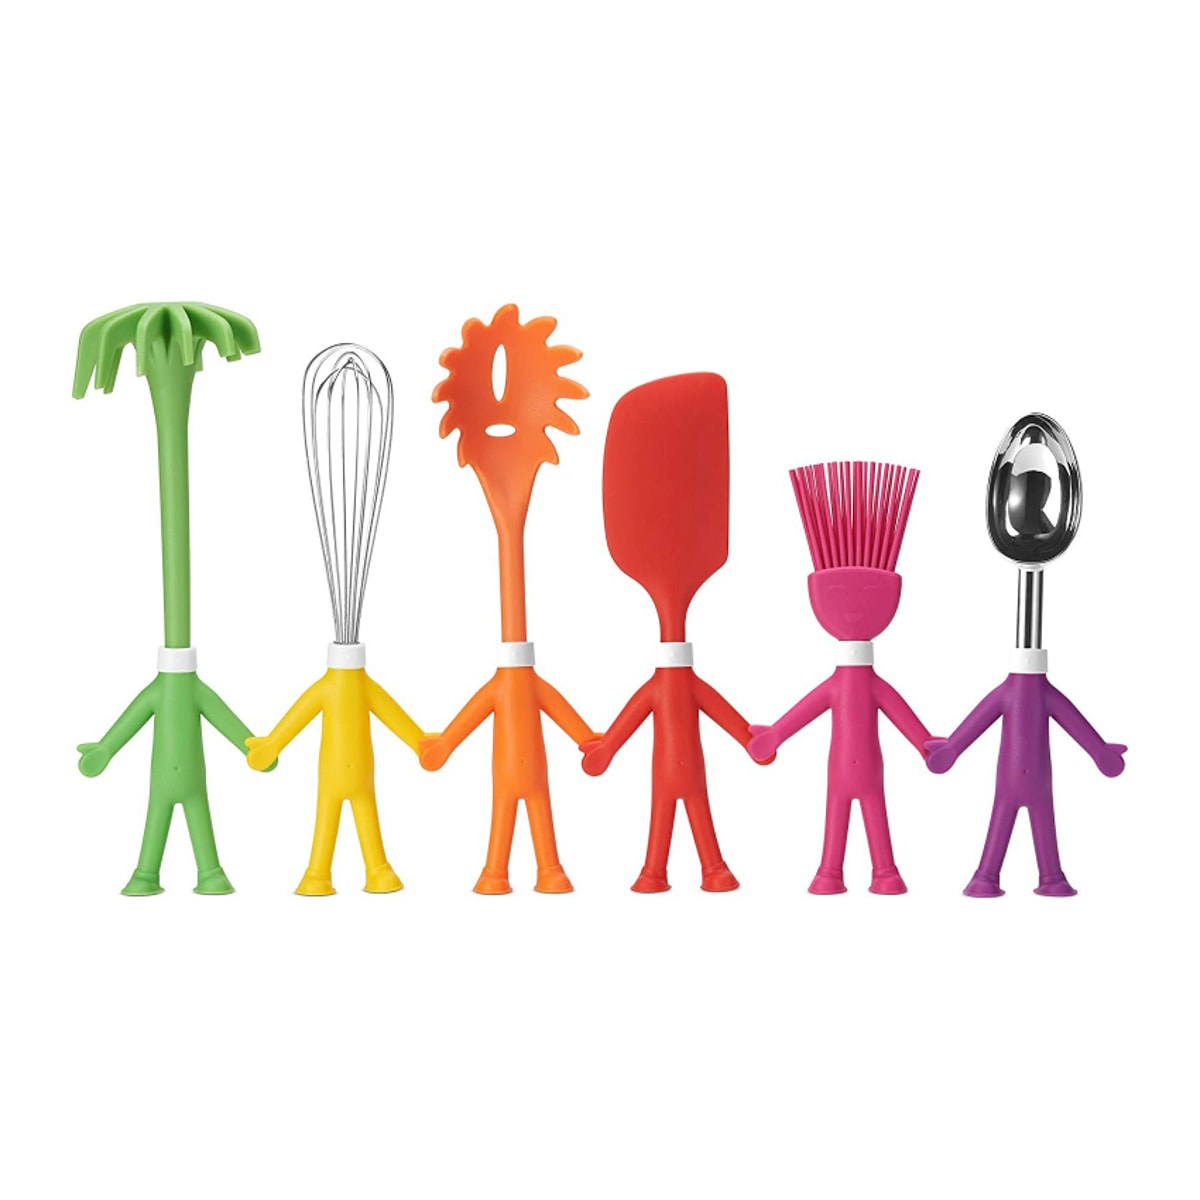 A set of brightly-colored cooking tools that are made to look like people.